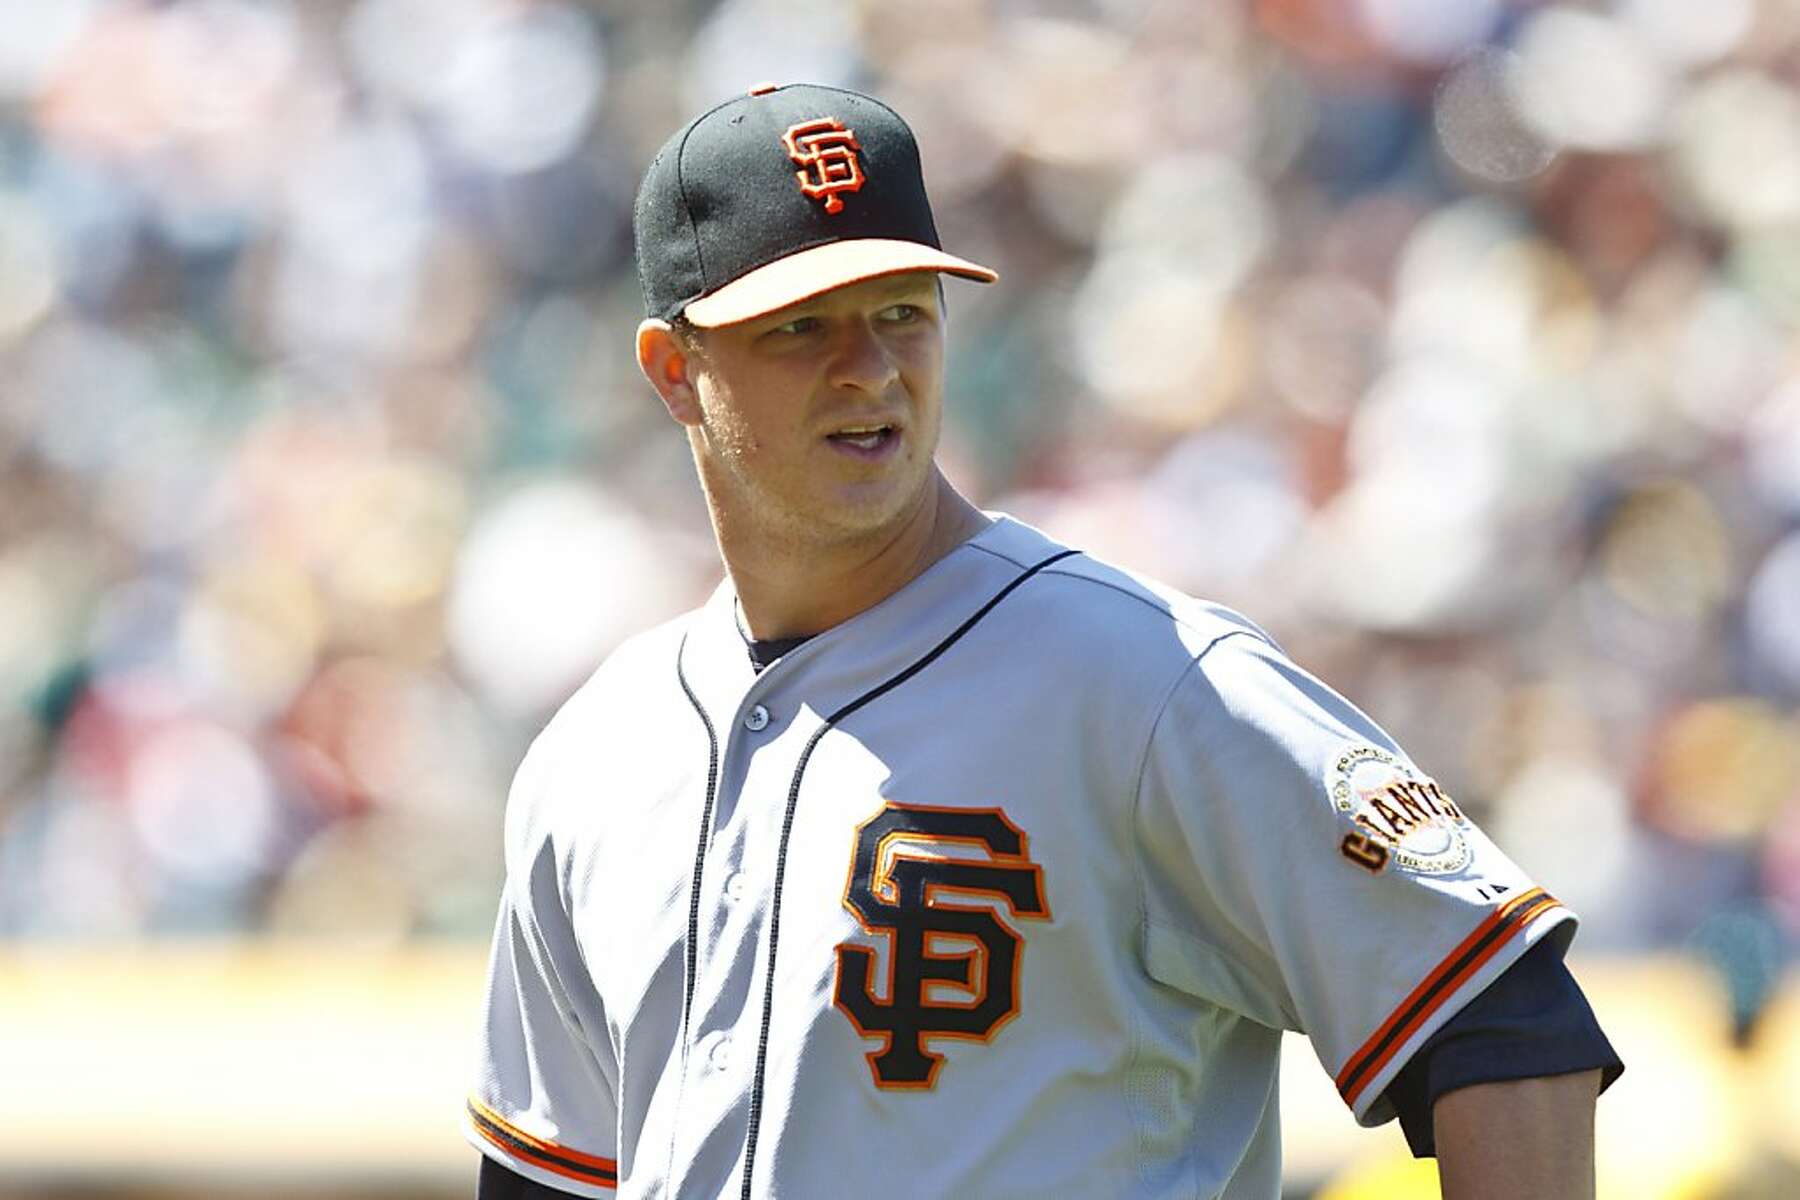 Barber: Matt Cain might be nearing end with Giants